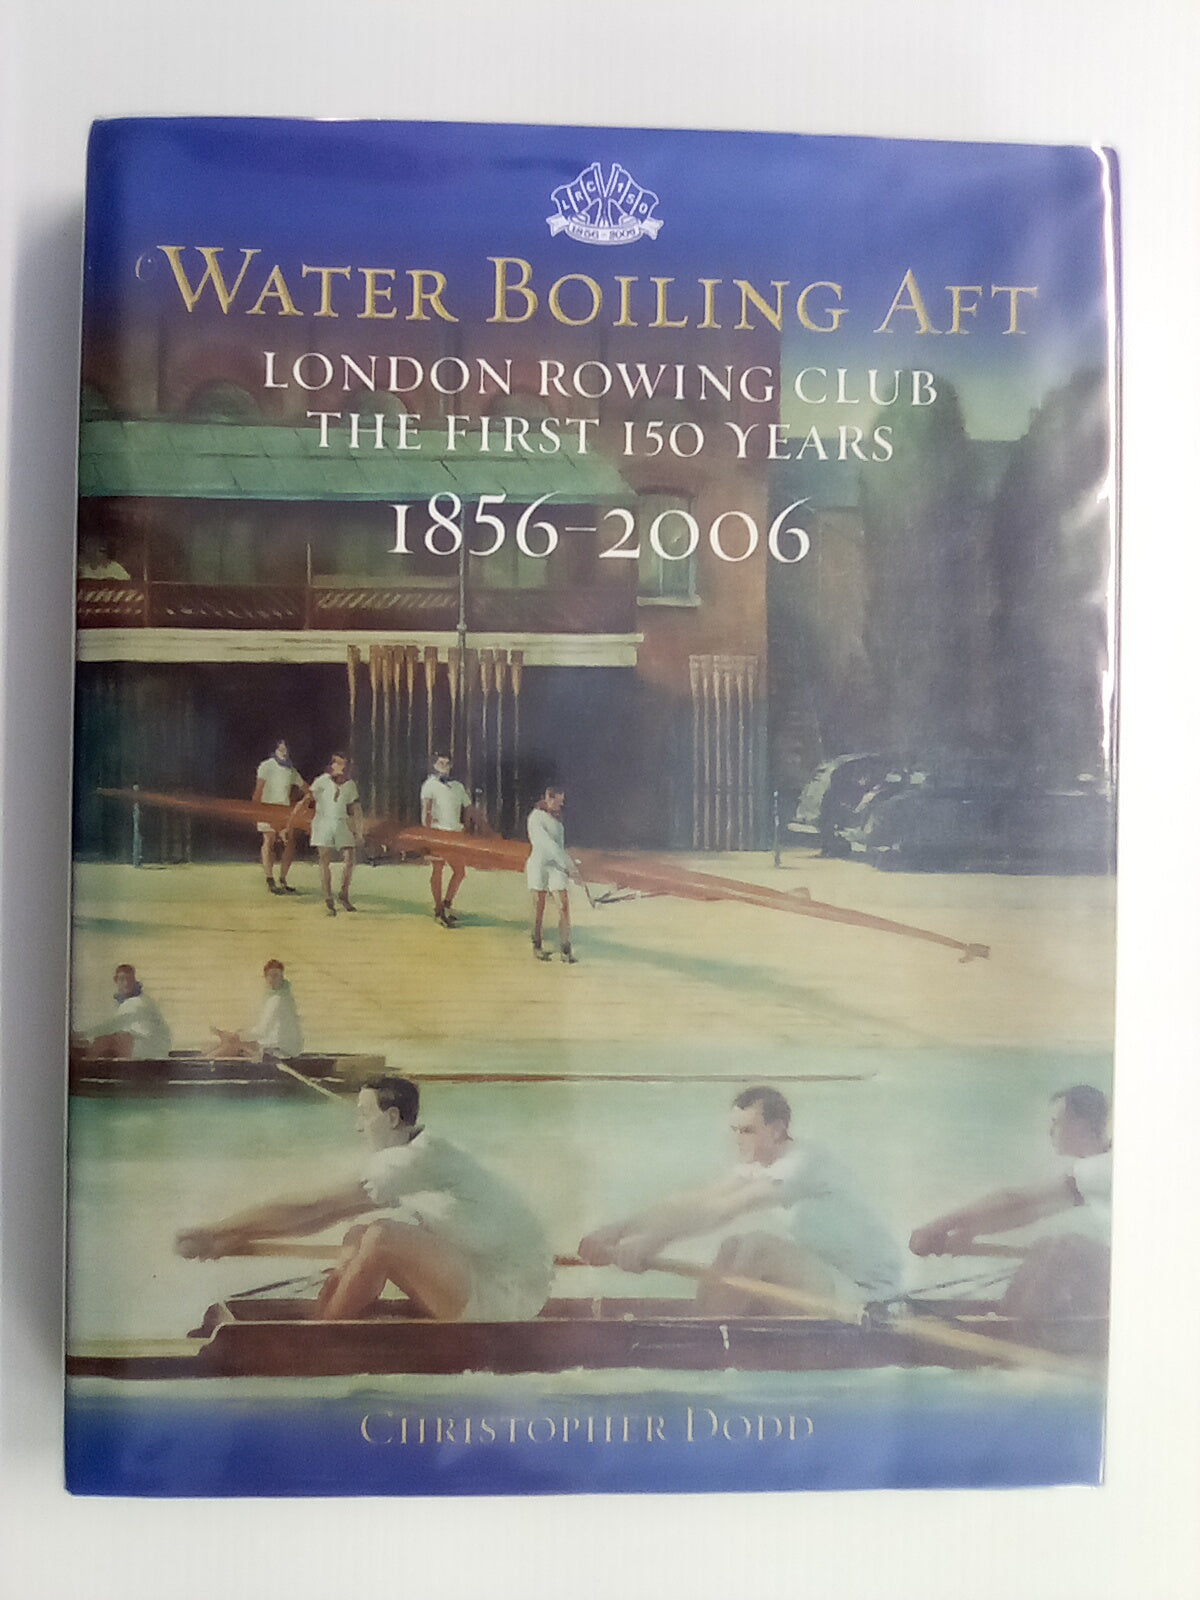 Water Boiling Aft - London Rowing Club 1856-2006